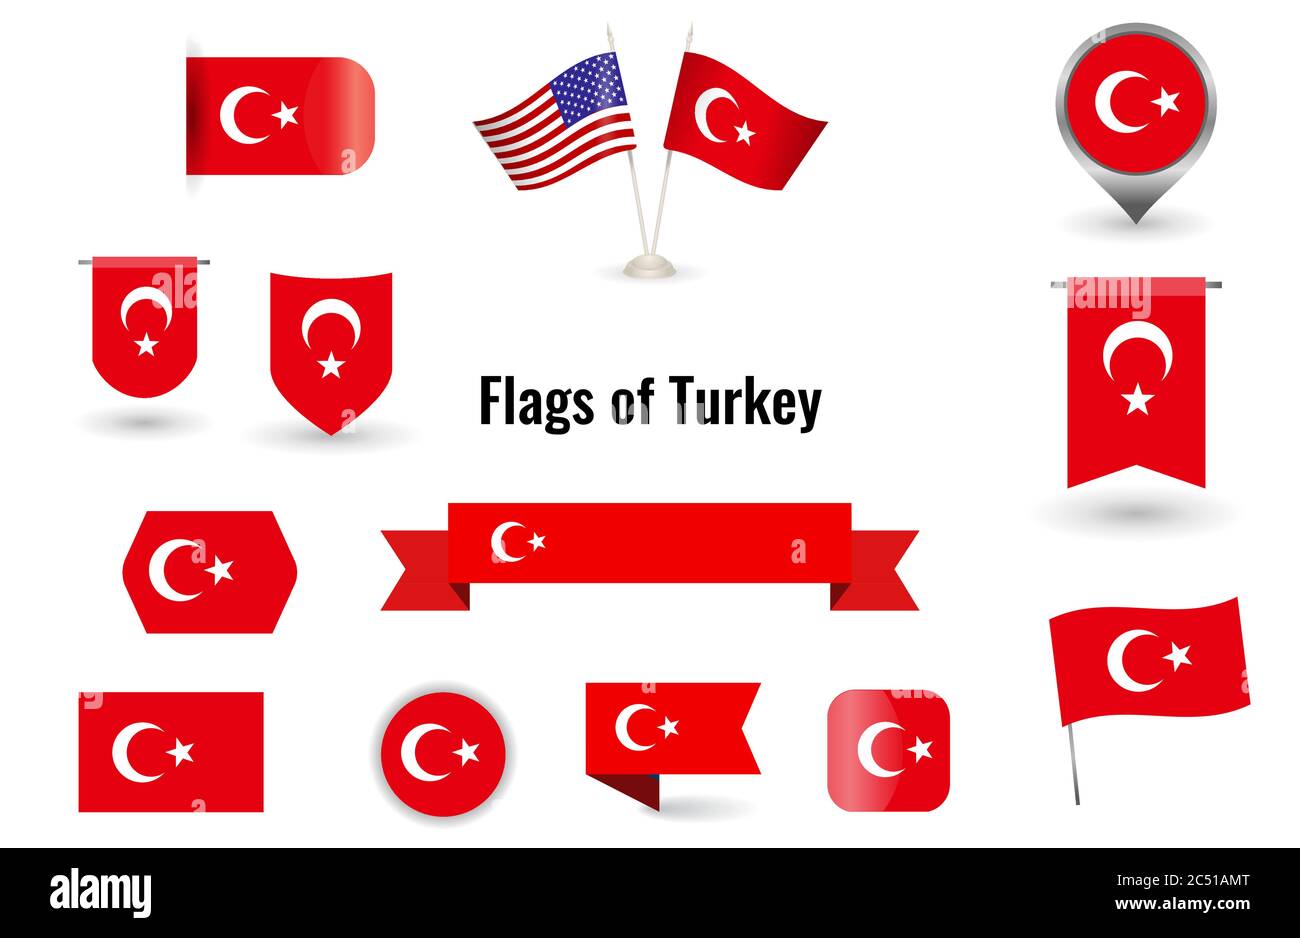 The Flag of Turkey. Big set of icons and symbols. Square and round Turkey flag. Collection of different flags of horizontal and vertical. Stock Vector